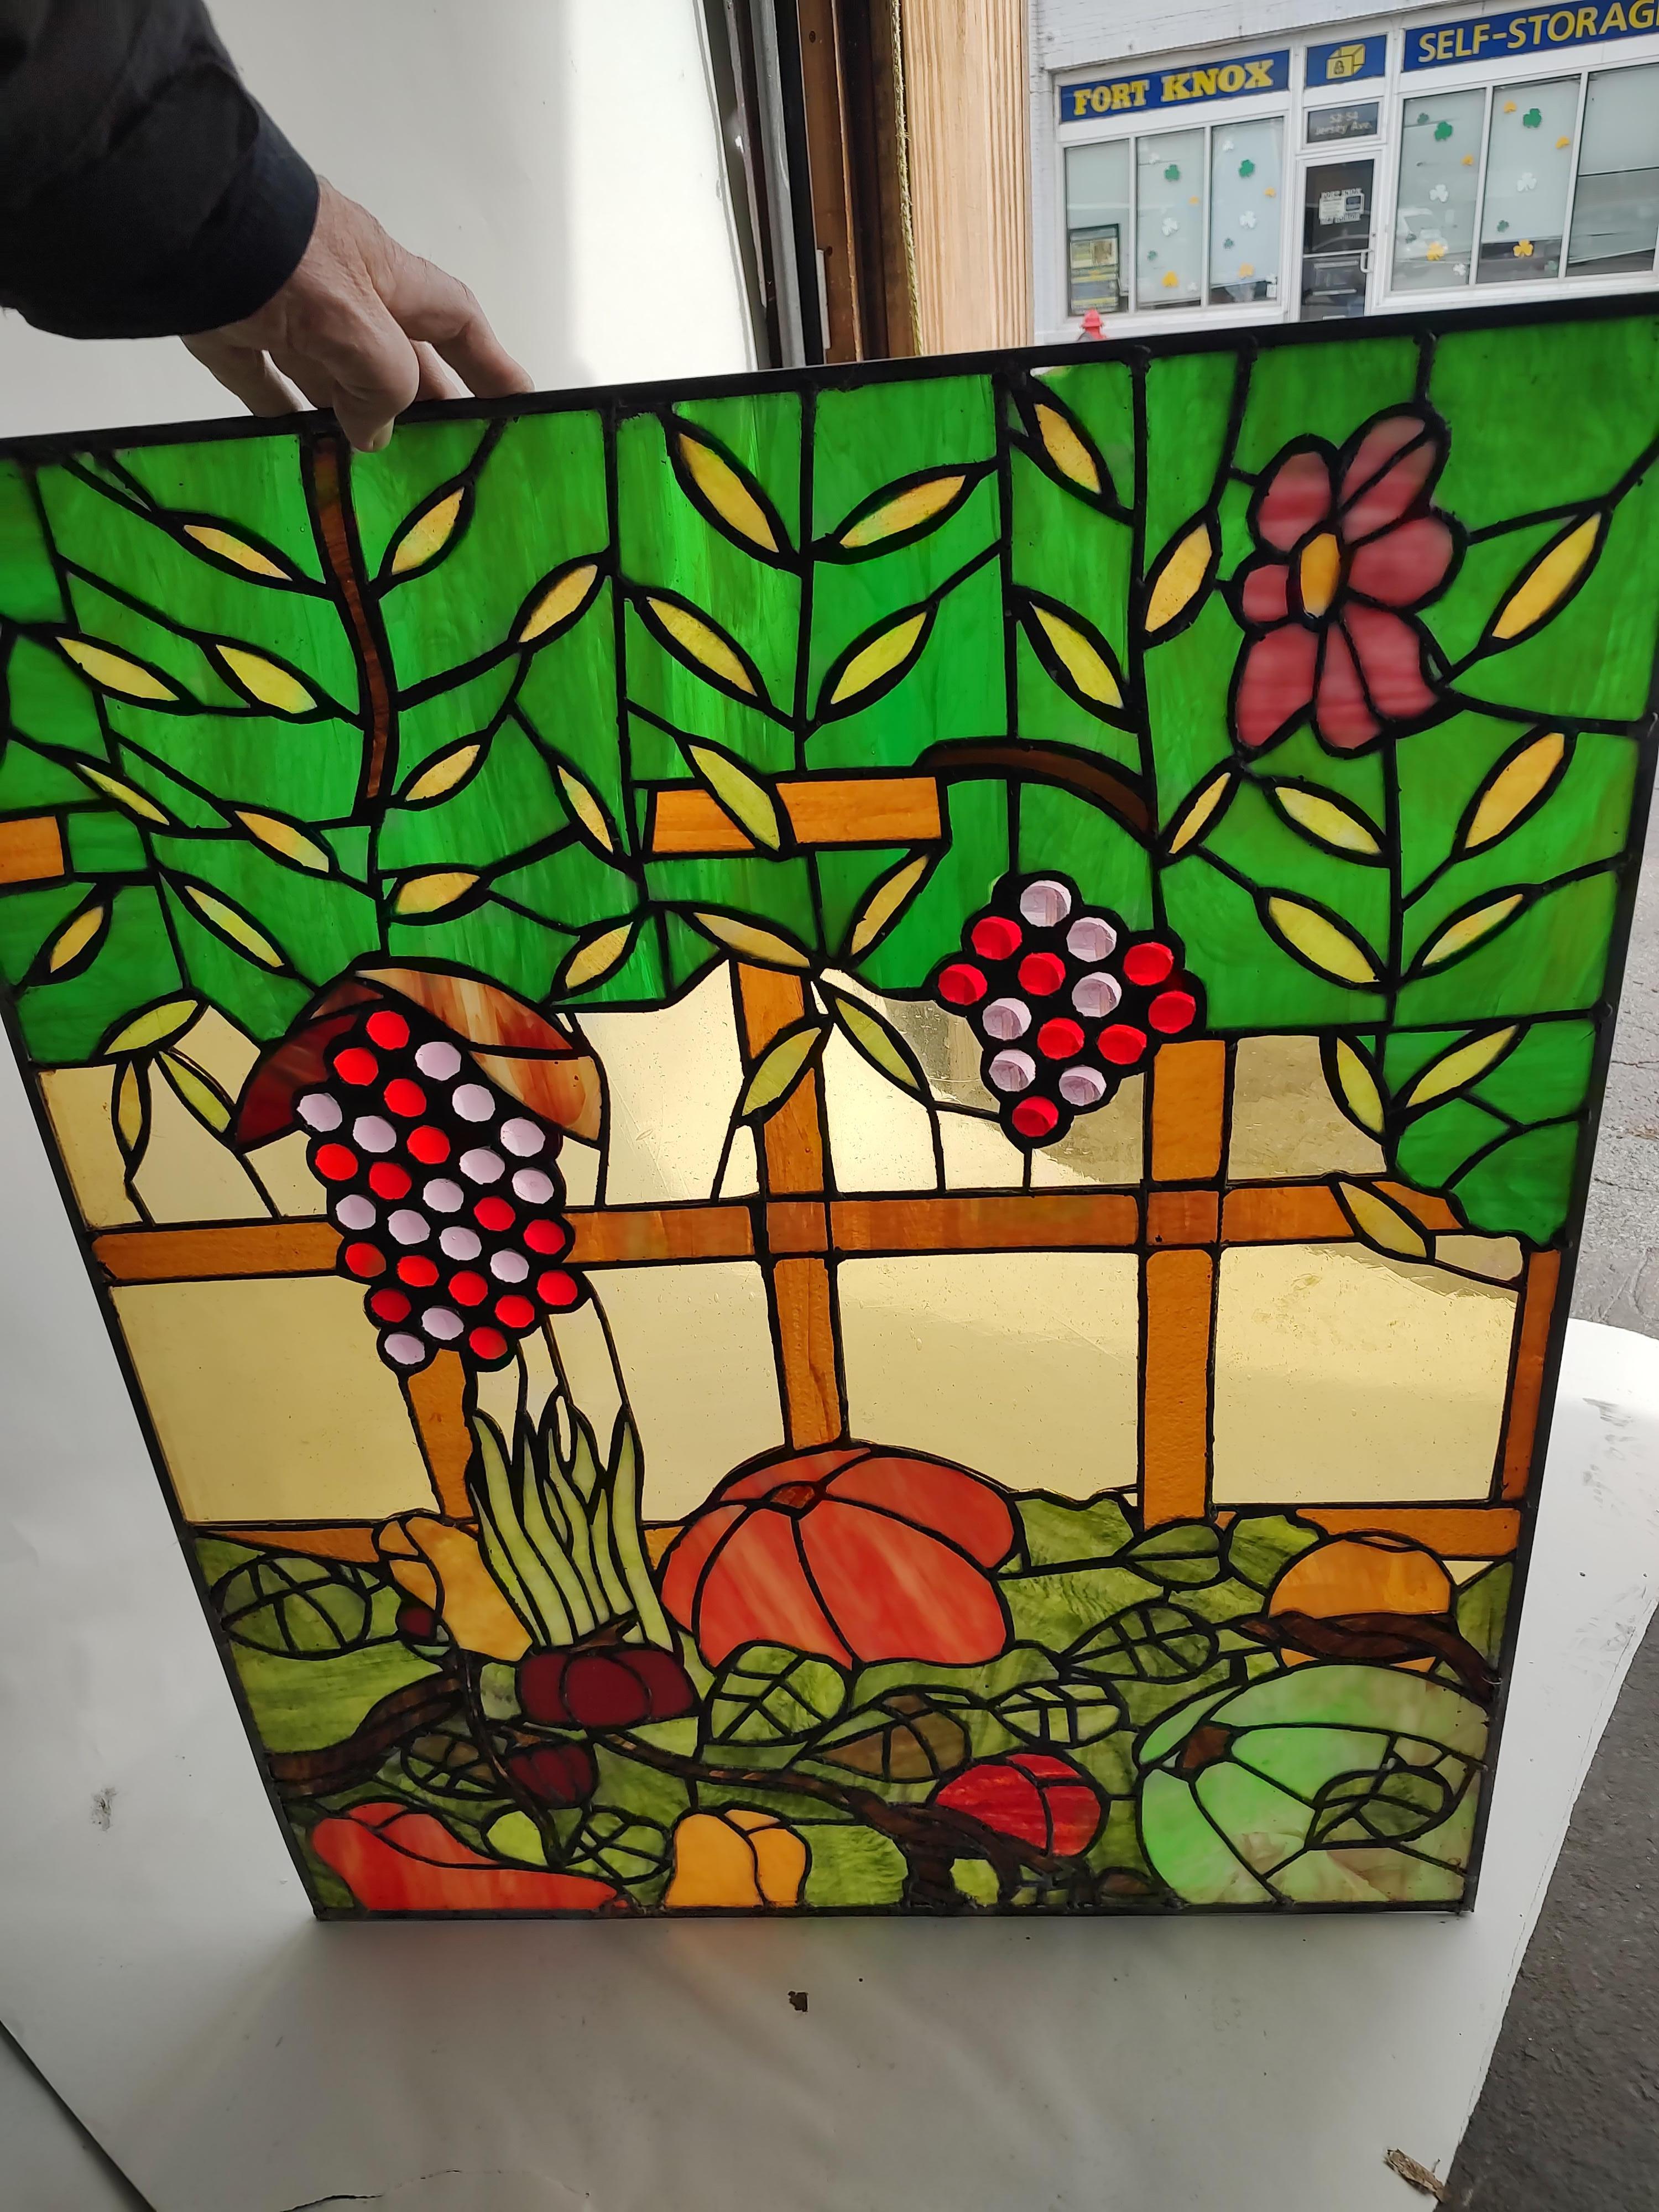 Arts and Crafts Mid-Century Modern Stained Glass Window by Rainbow Studios NY, circa 1965 #6 For Sale